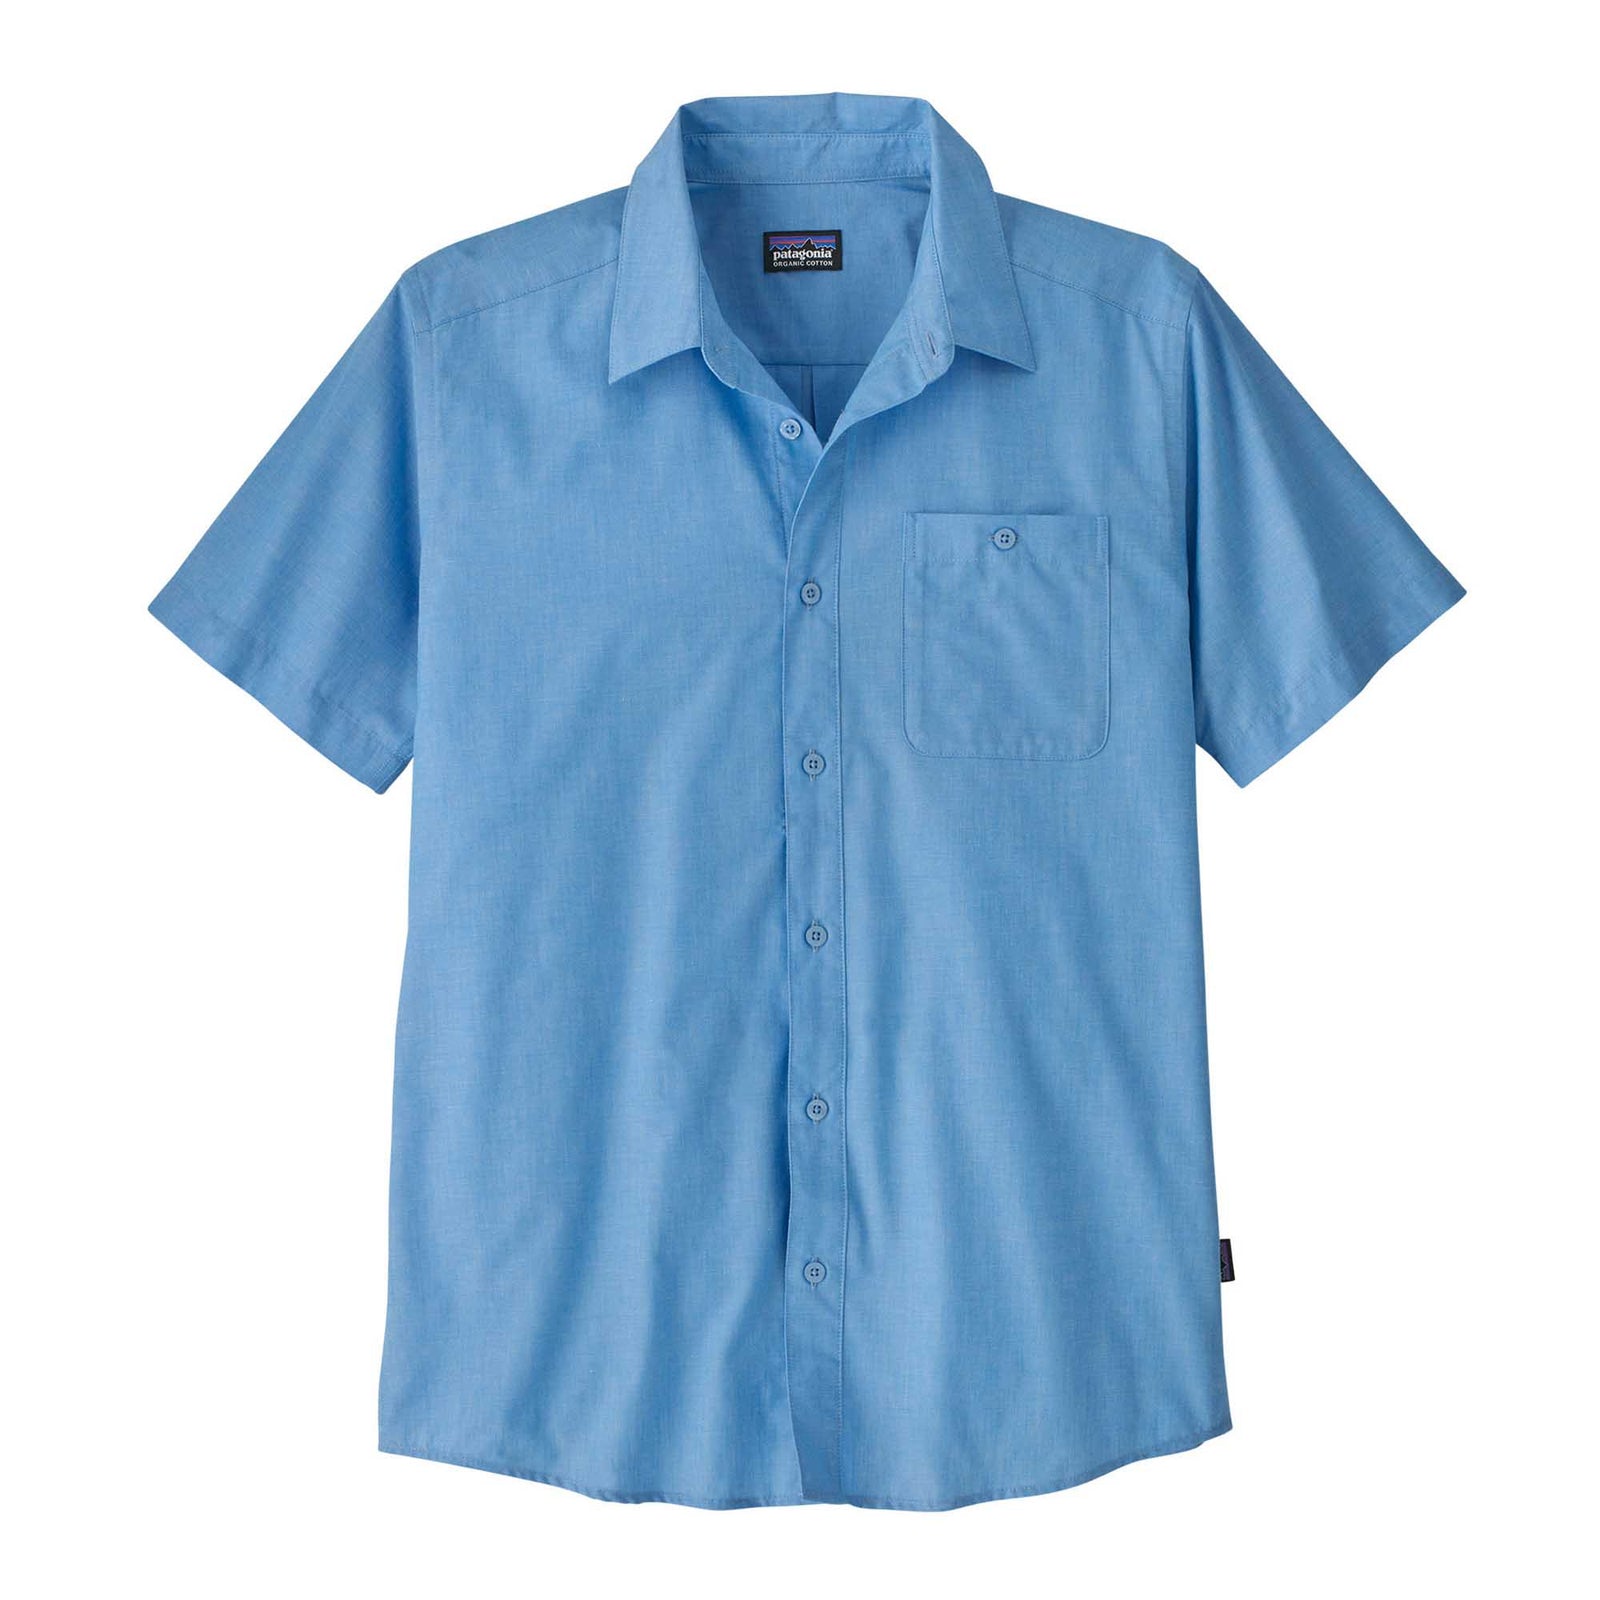 Patagonia Early Rise Stretch Shirt - Women's - Sienna Clay - L